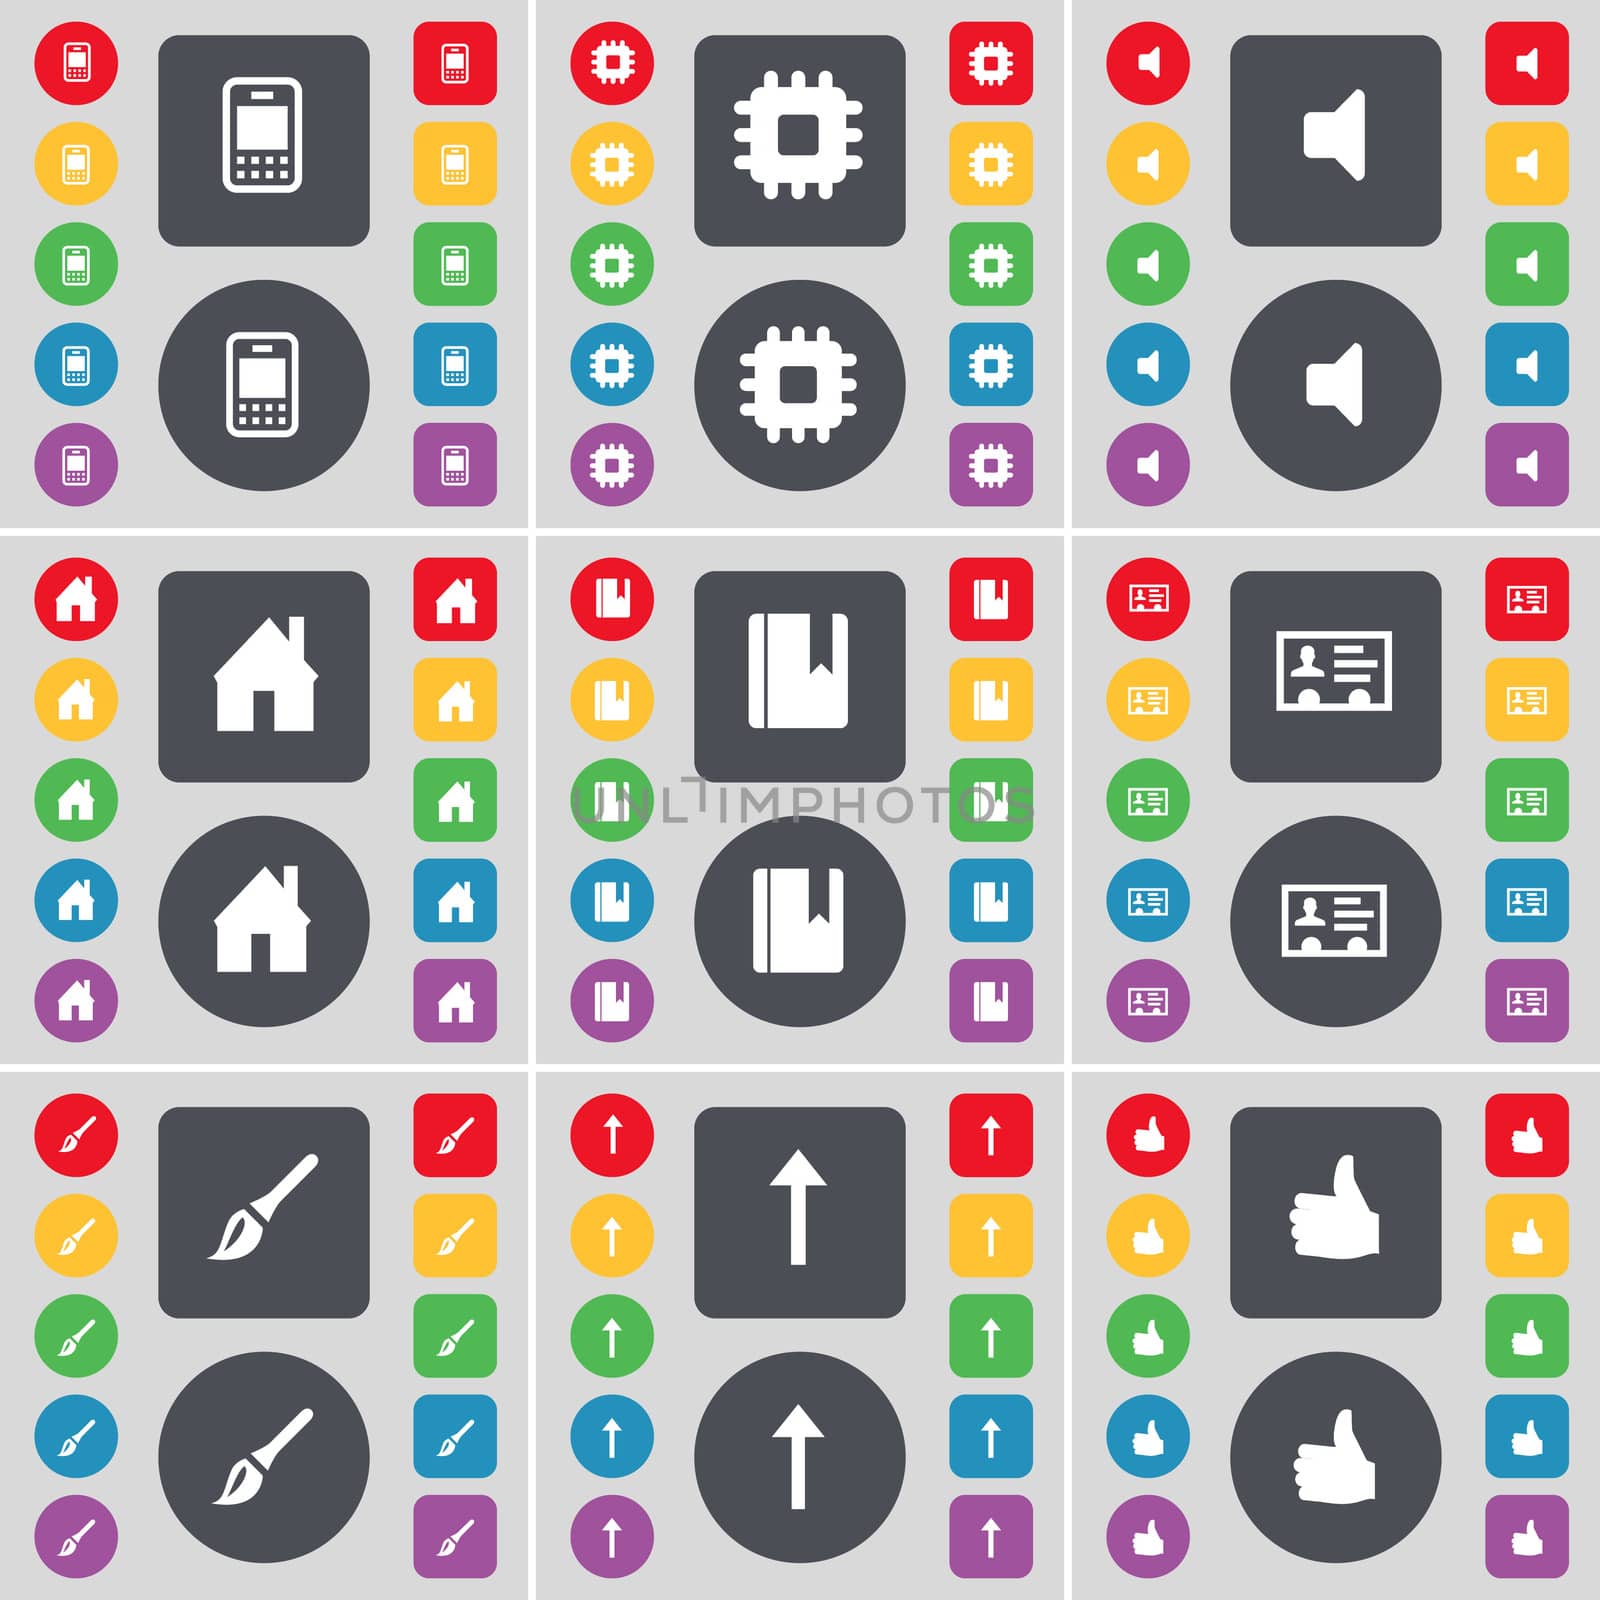 Mobile phone, Processor, Sound, House, Dictionary, Contact, Brush, Arrow up, Like icon symbol. A large set of flat, colored buttons for your design. illustration